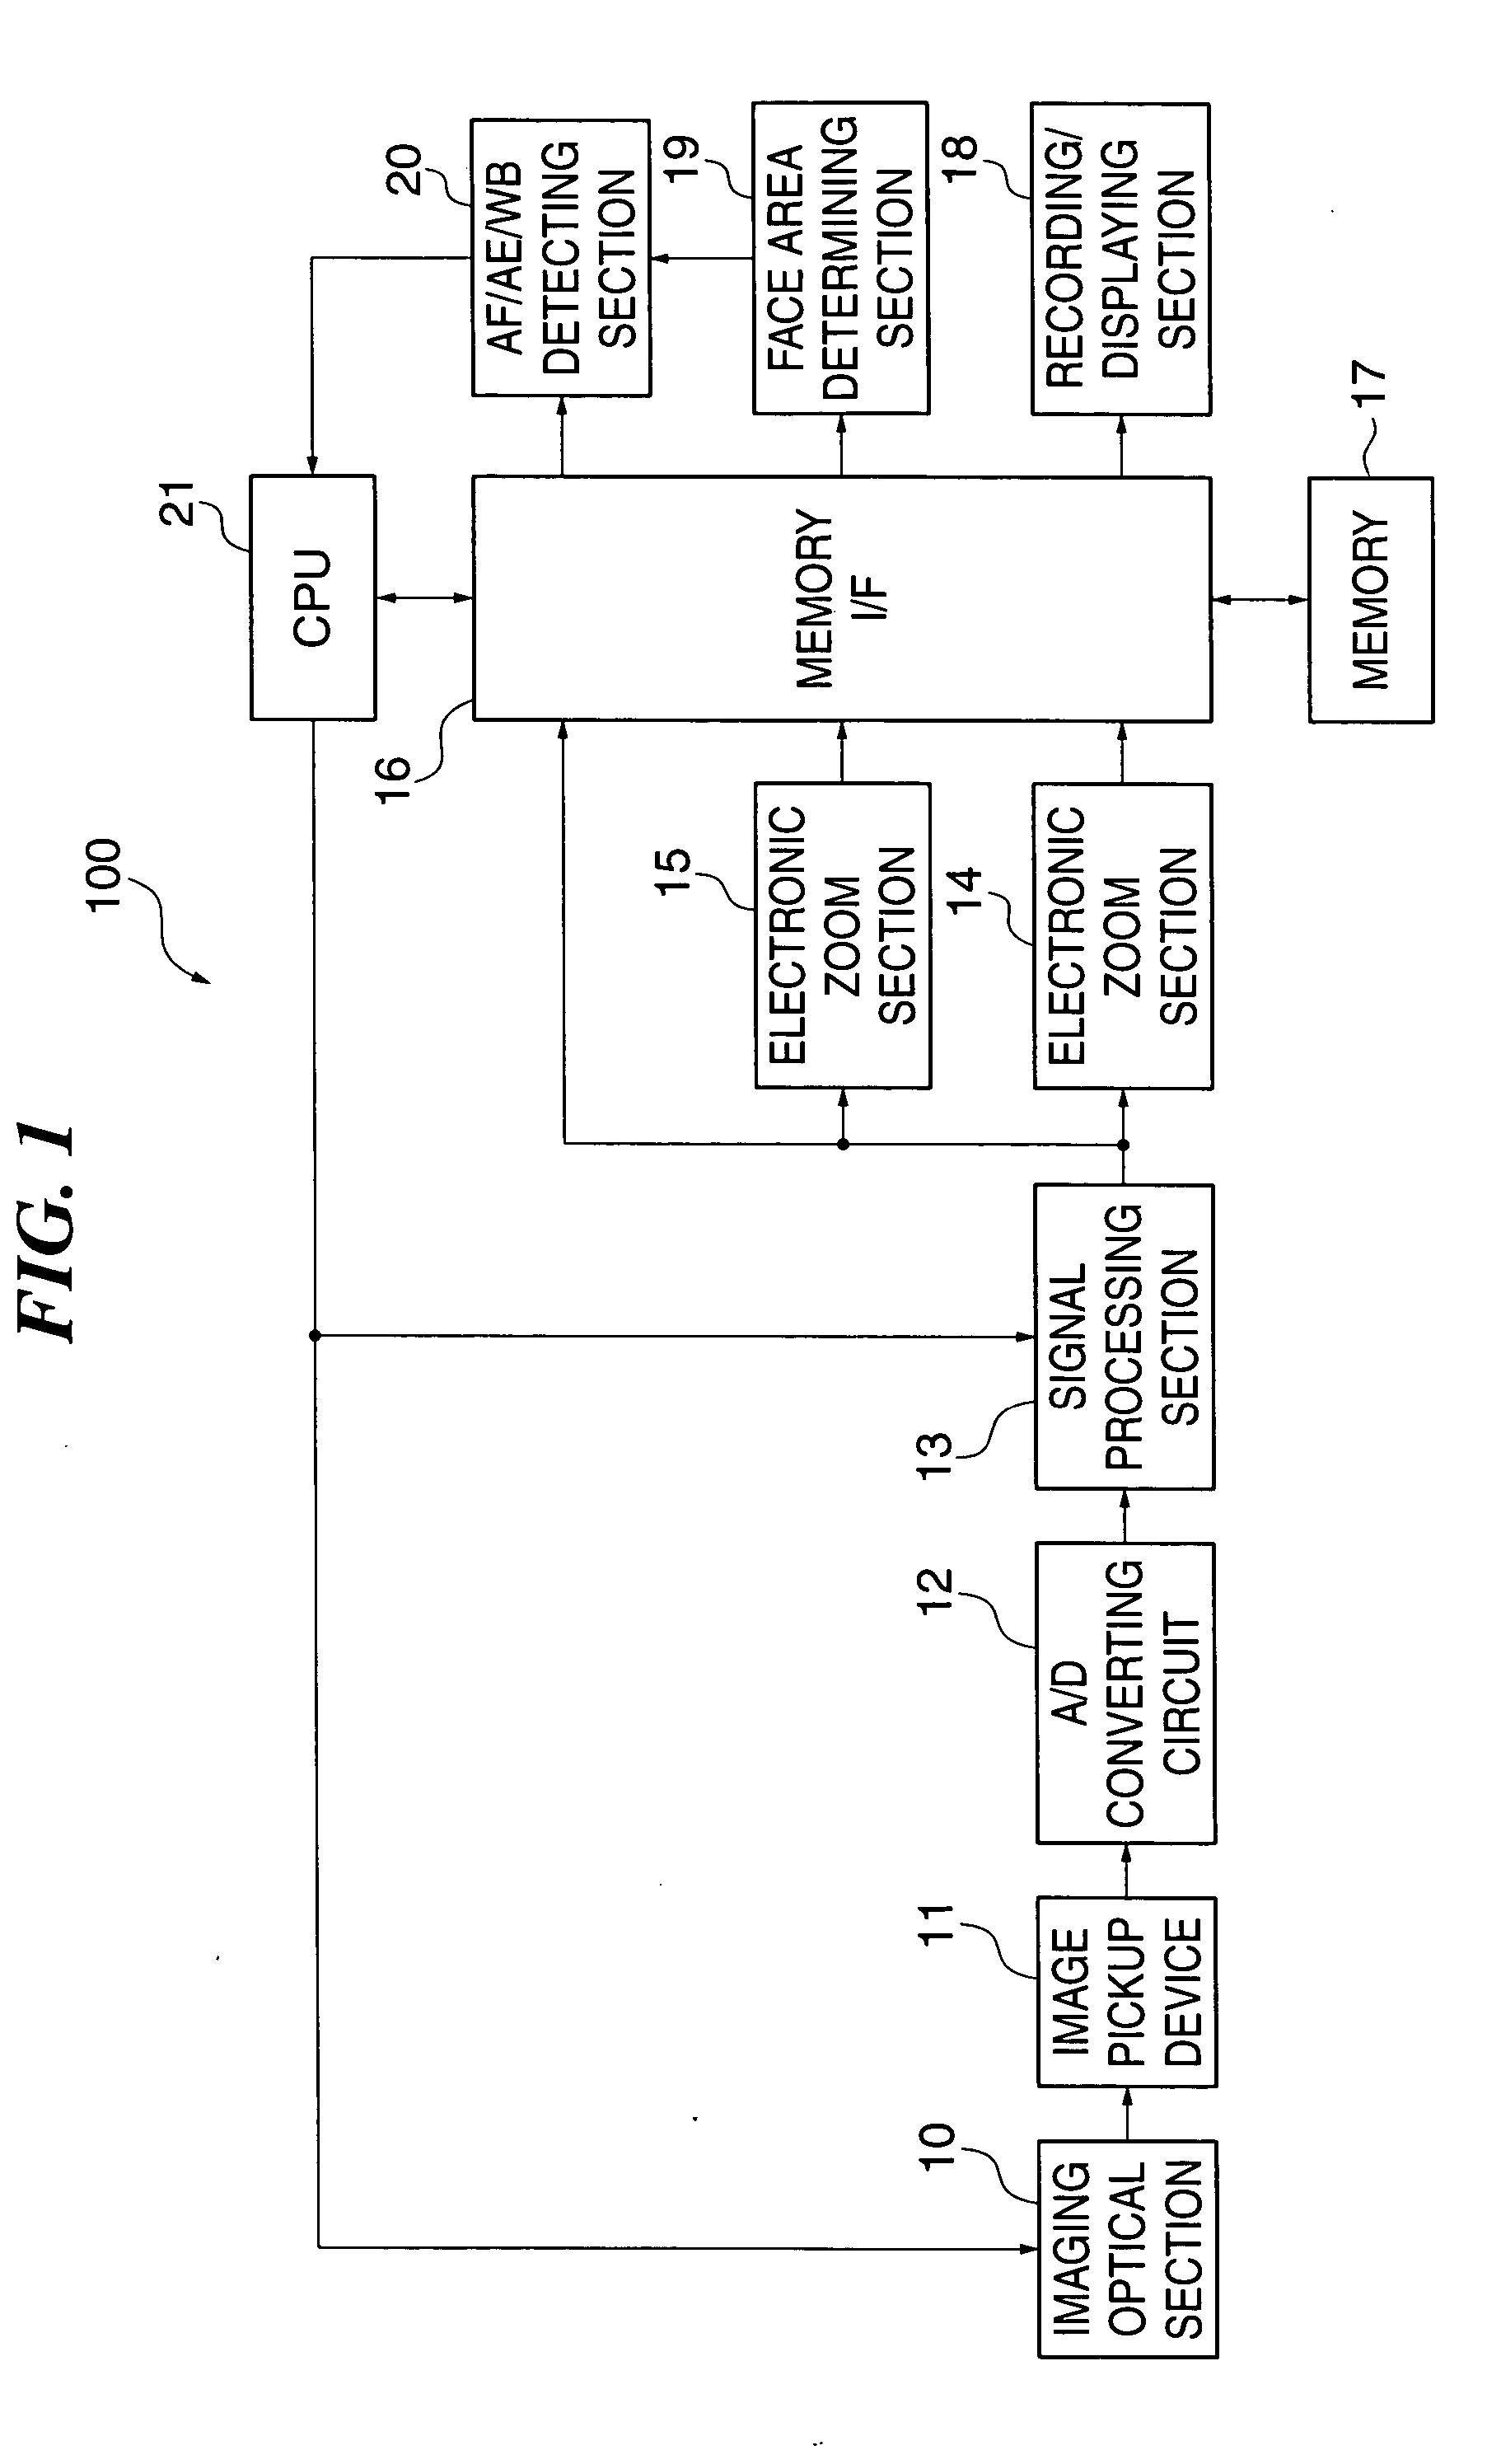 Image pickup apparatus, method of controlling the apparatus, and program for implementing the method, and storage medium storing the program